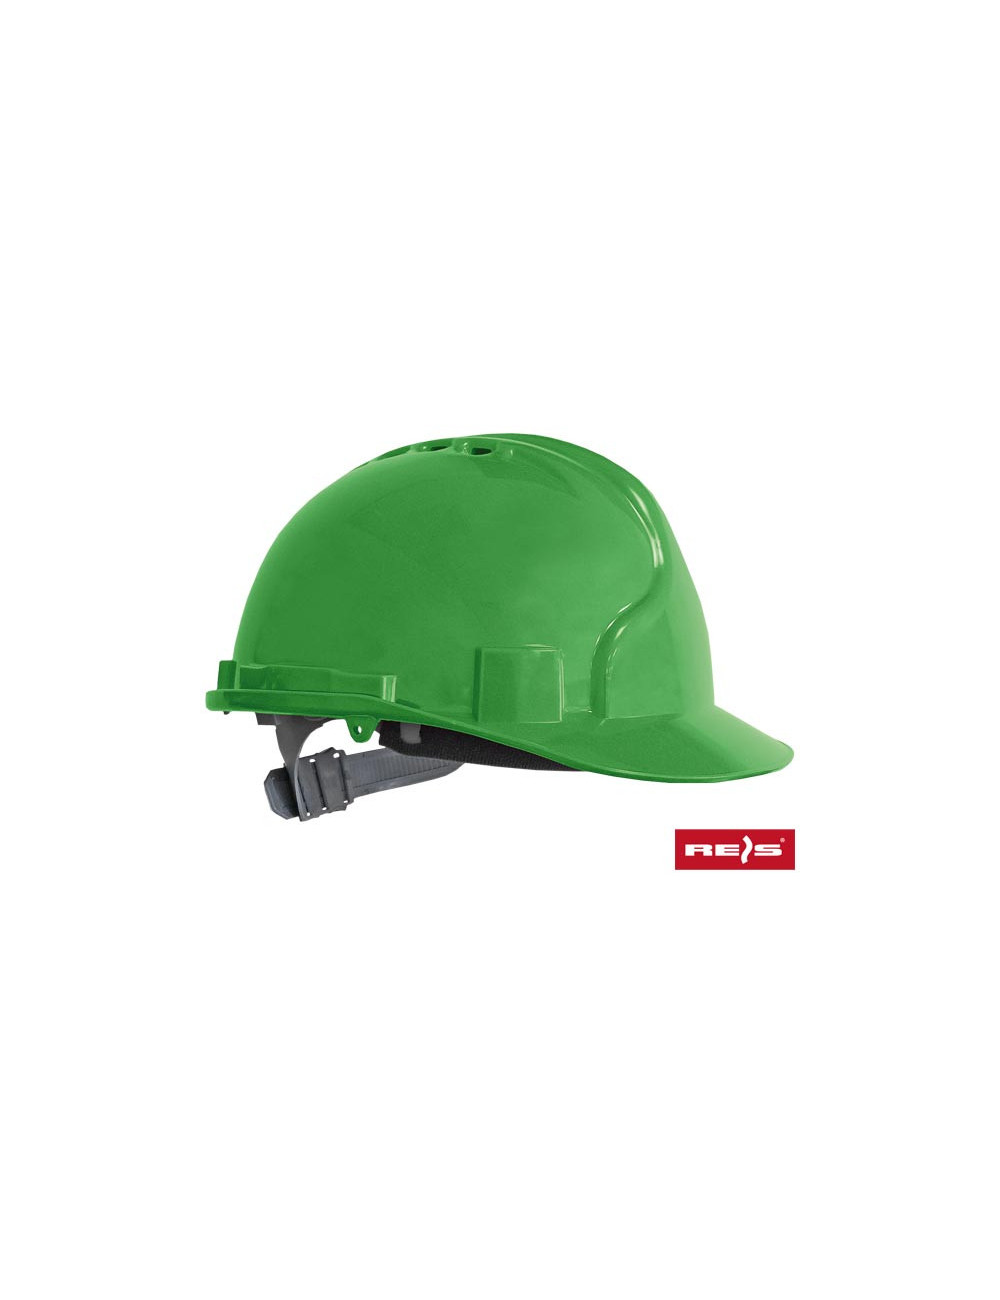 Safety helmet kas with green Reis